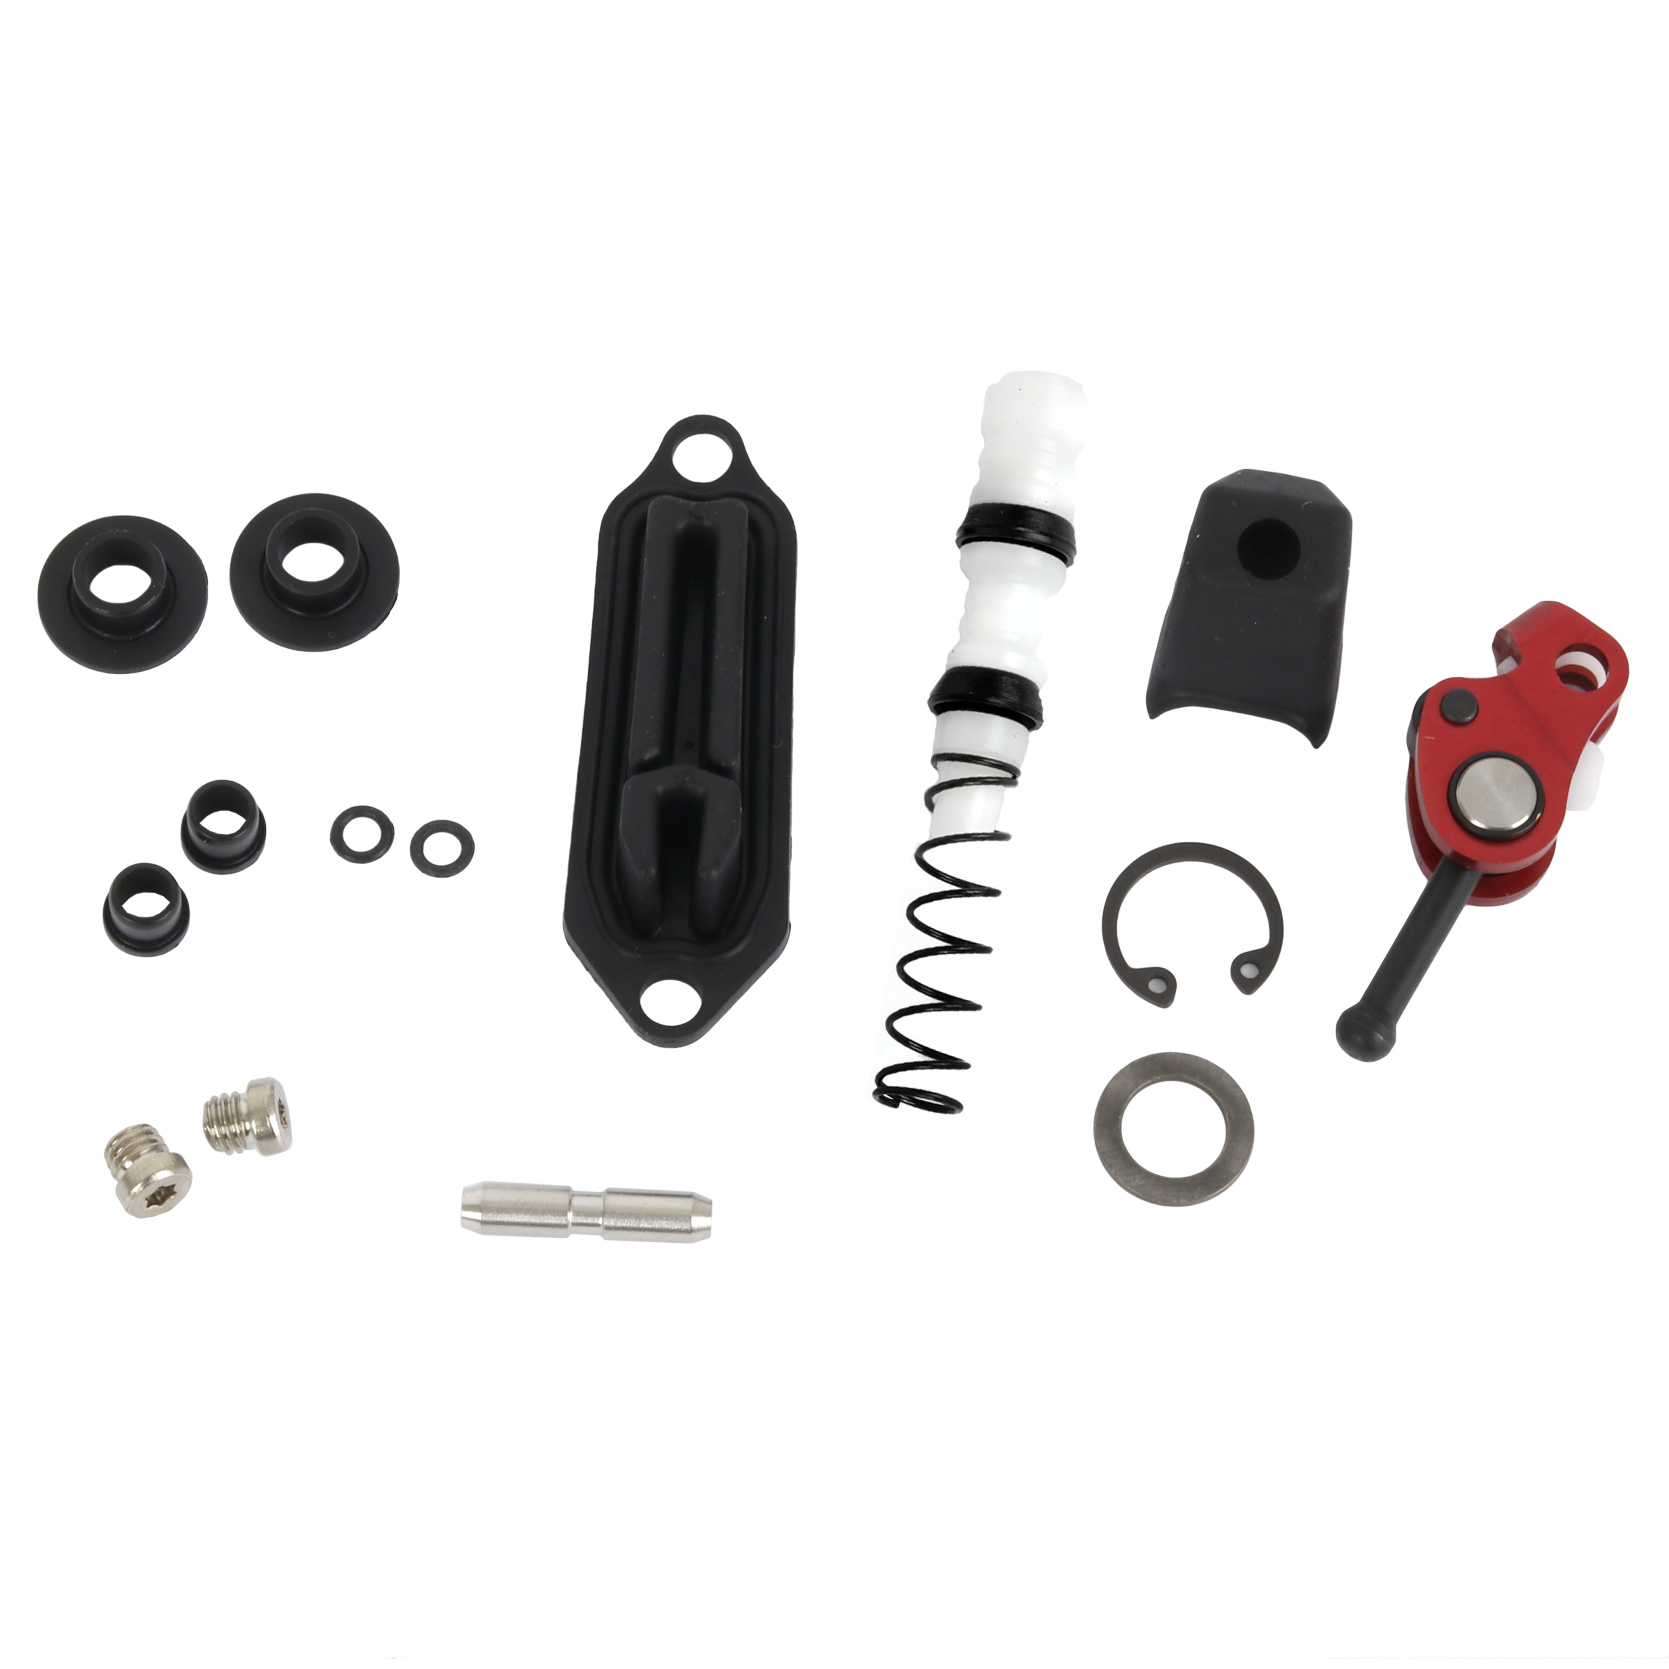 Picture of SRAM Service Kit for Code Stealth Brake Lever - Bronze | C1 - 11.5018.054.003